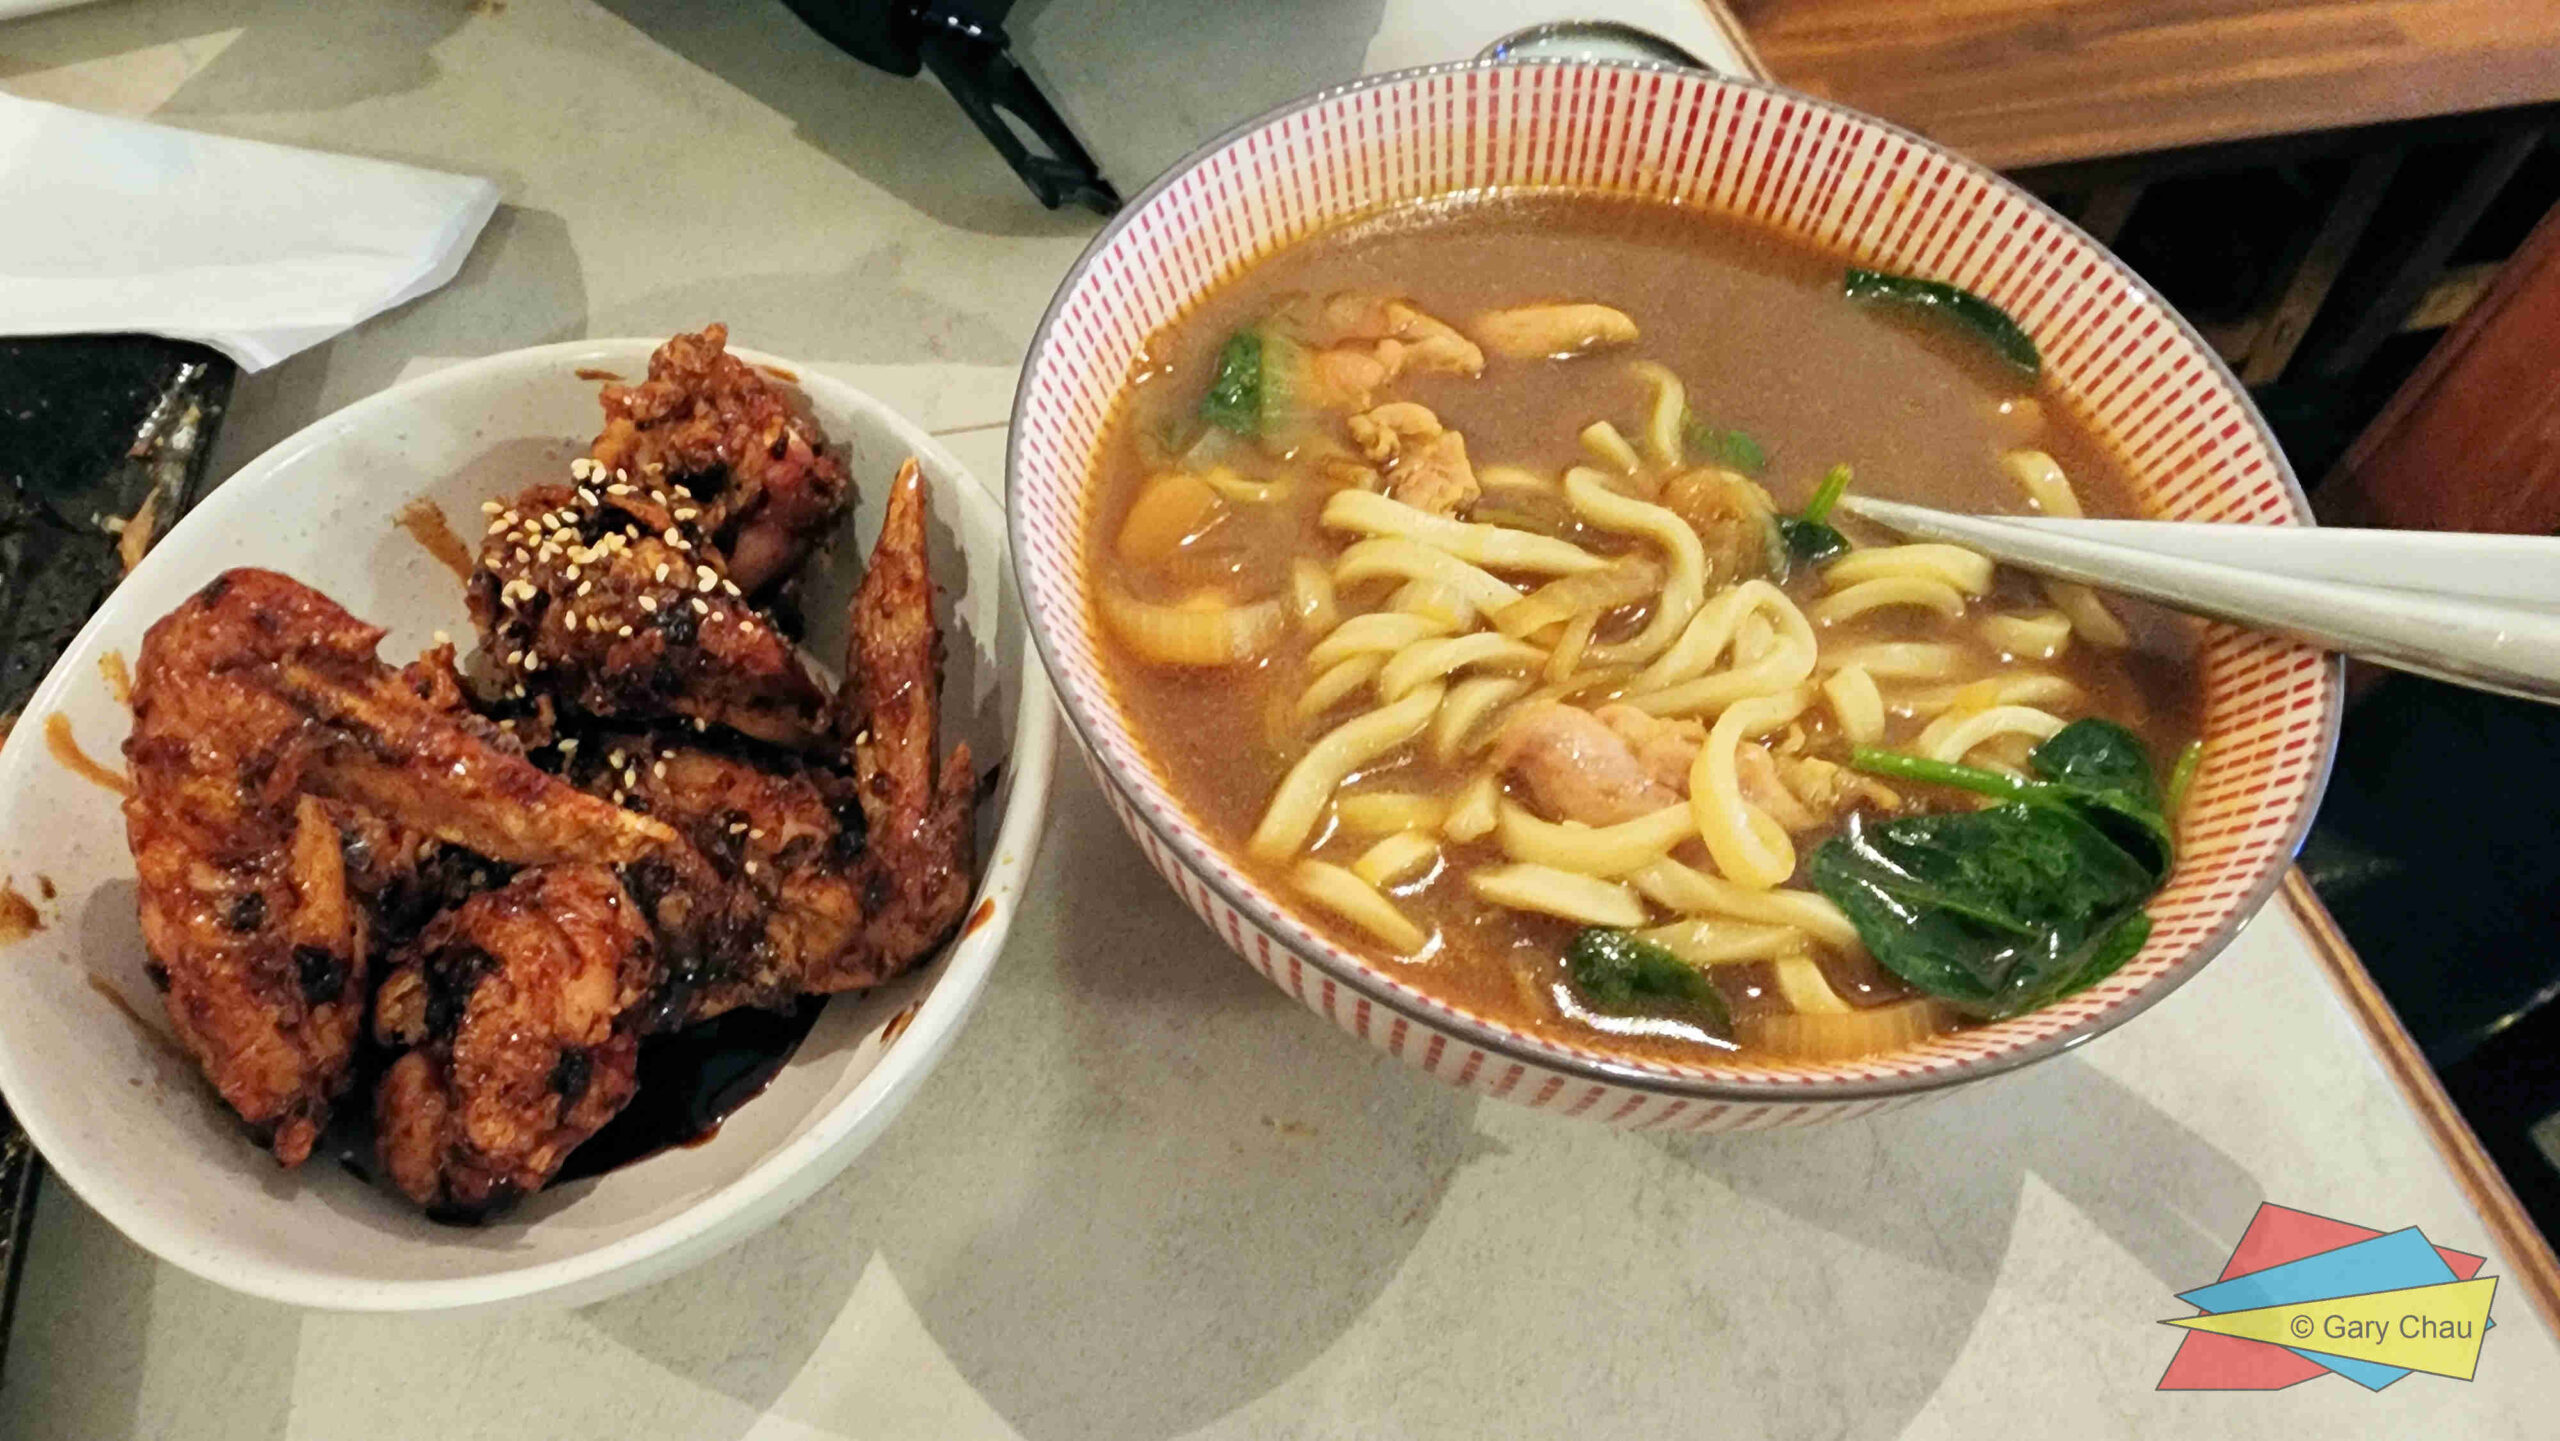 Chicken Tebasaki (fried chicken wings) in sweet soy sauce and Curry Udon